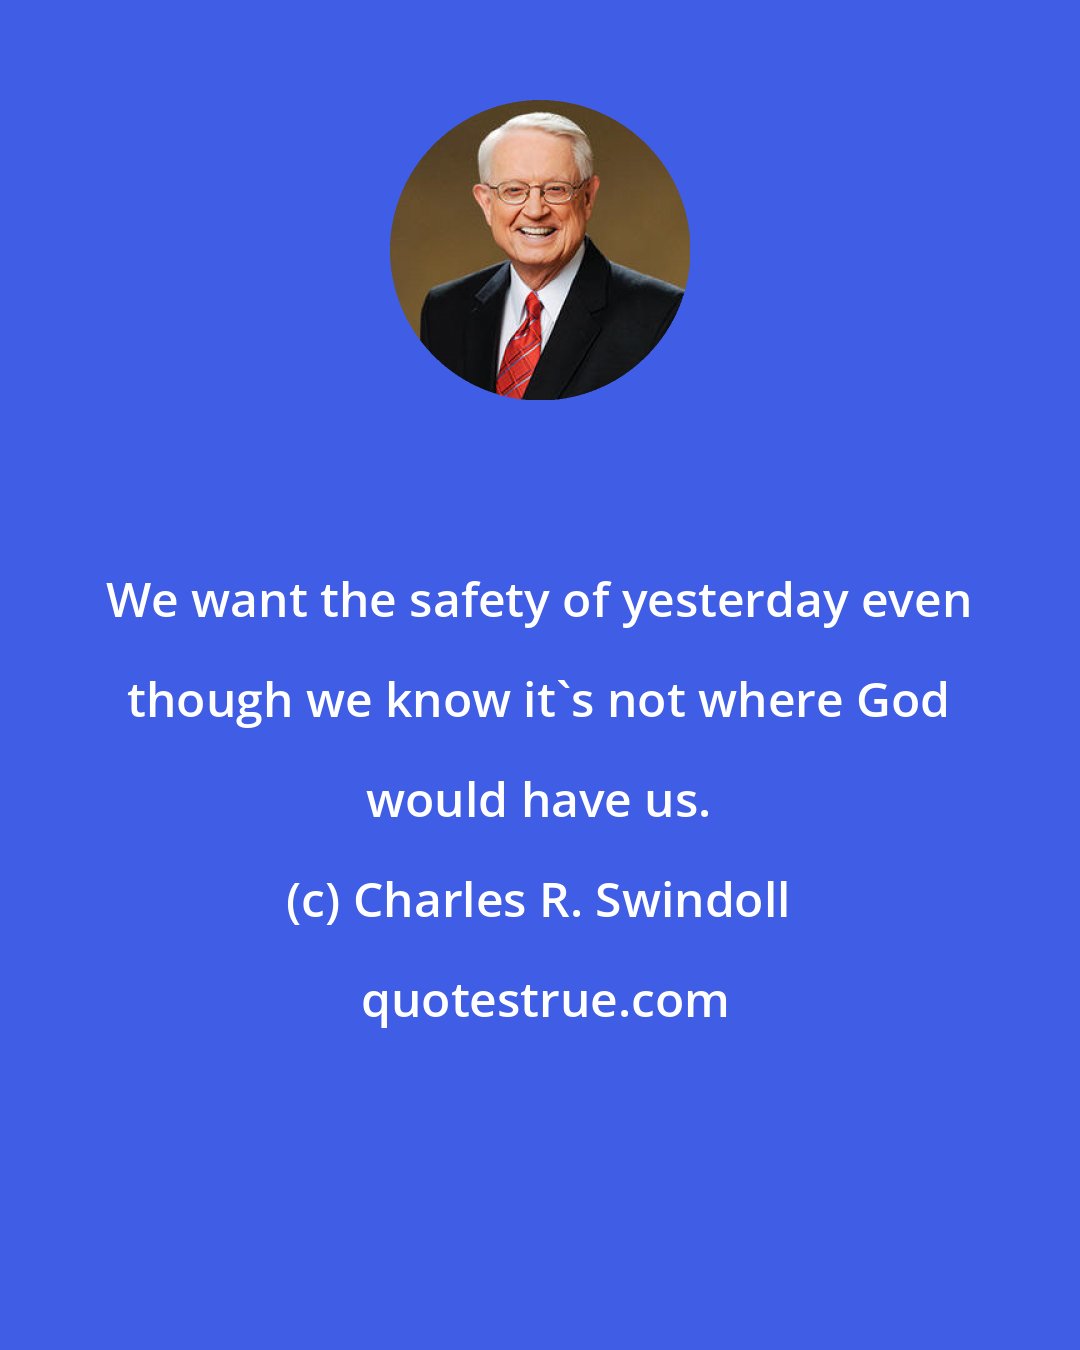 Charles R. Swindoll: We want the safety of yesterday even though we know it's not where God would have us.